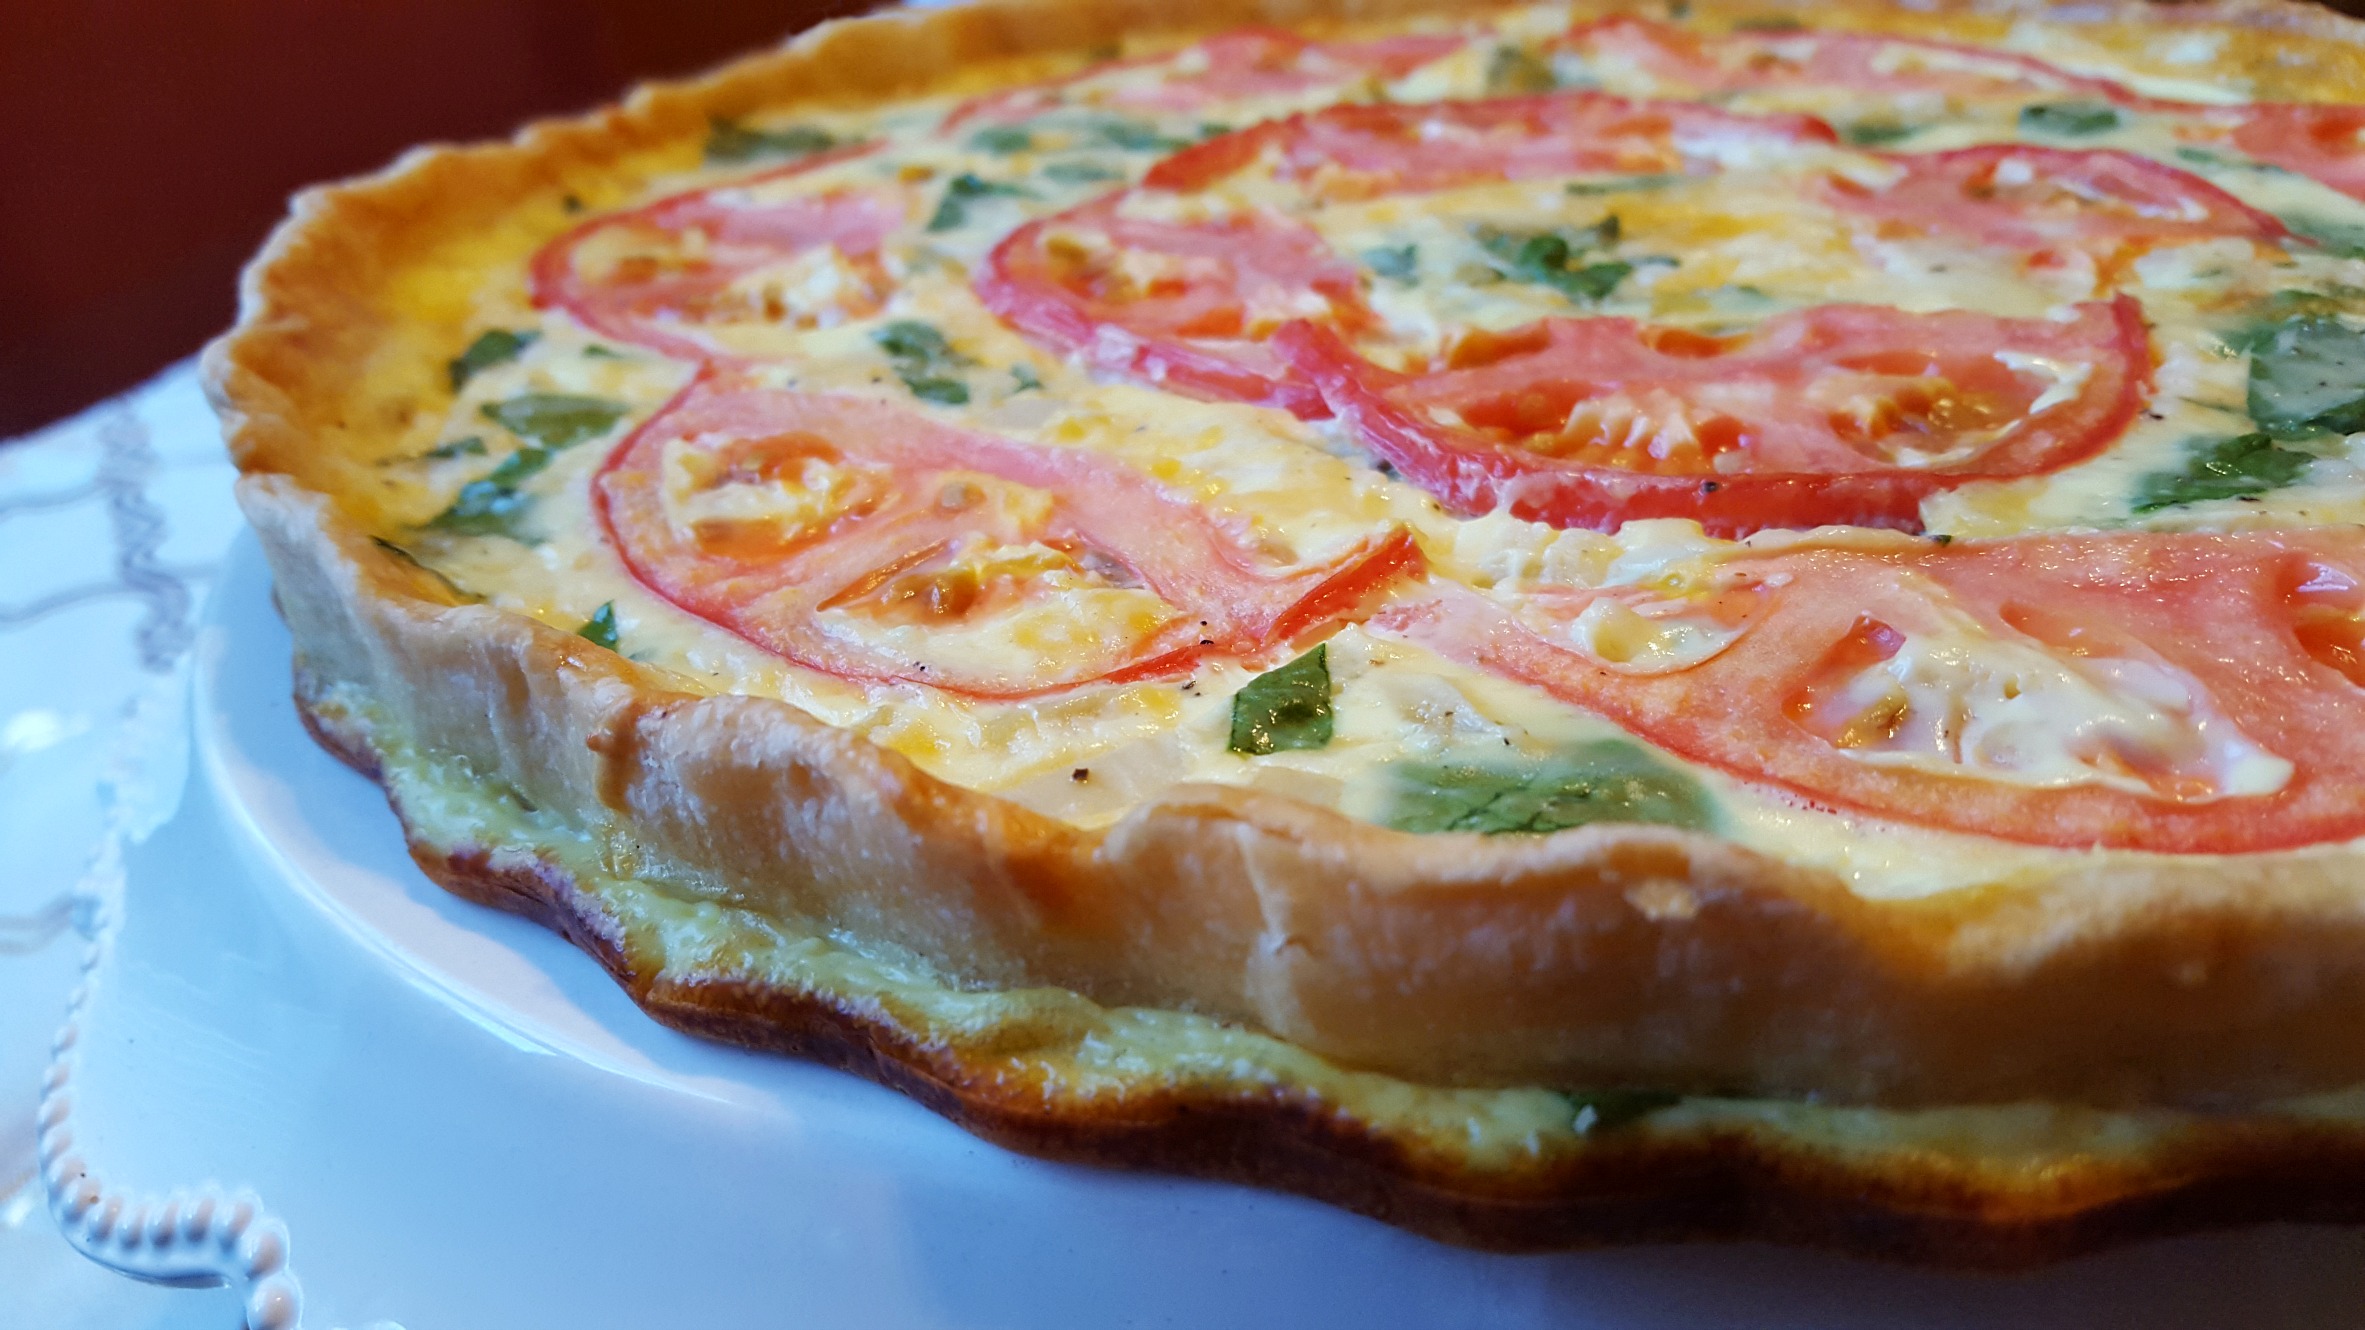 Tomato and Spinach Quiche | Original Recipe from Anyssa Alonso on @ShesIntentional